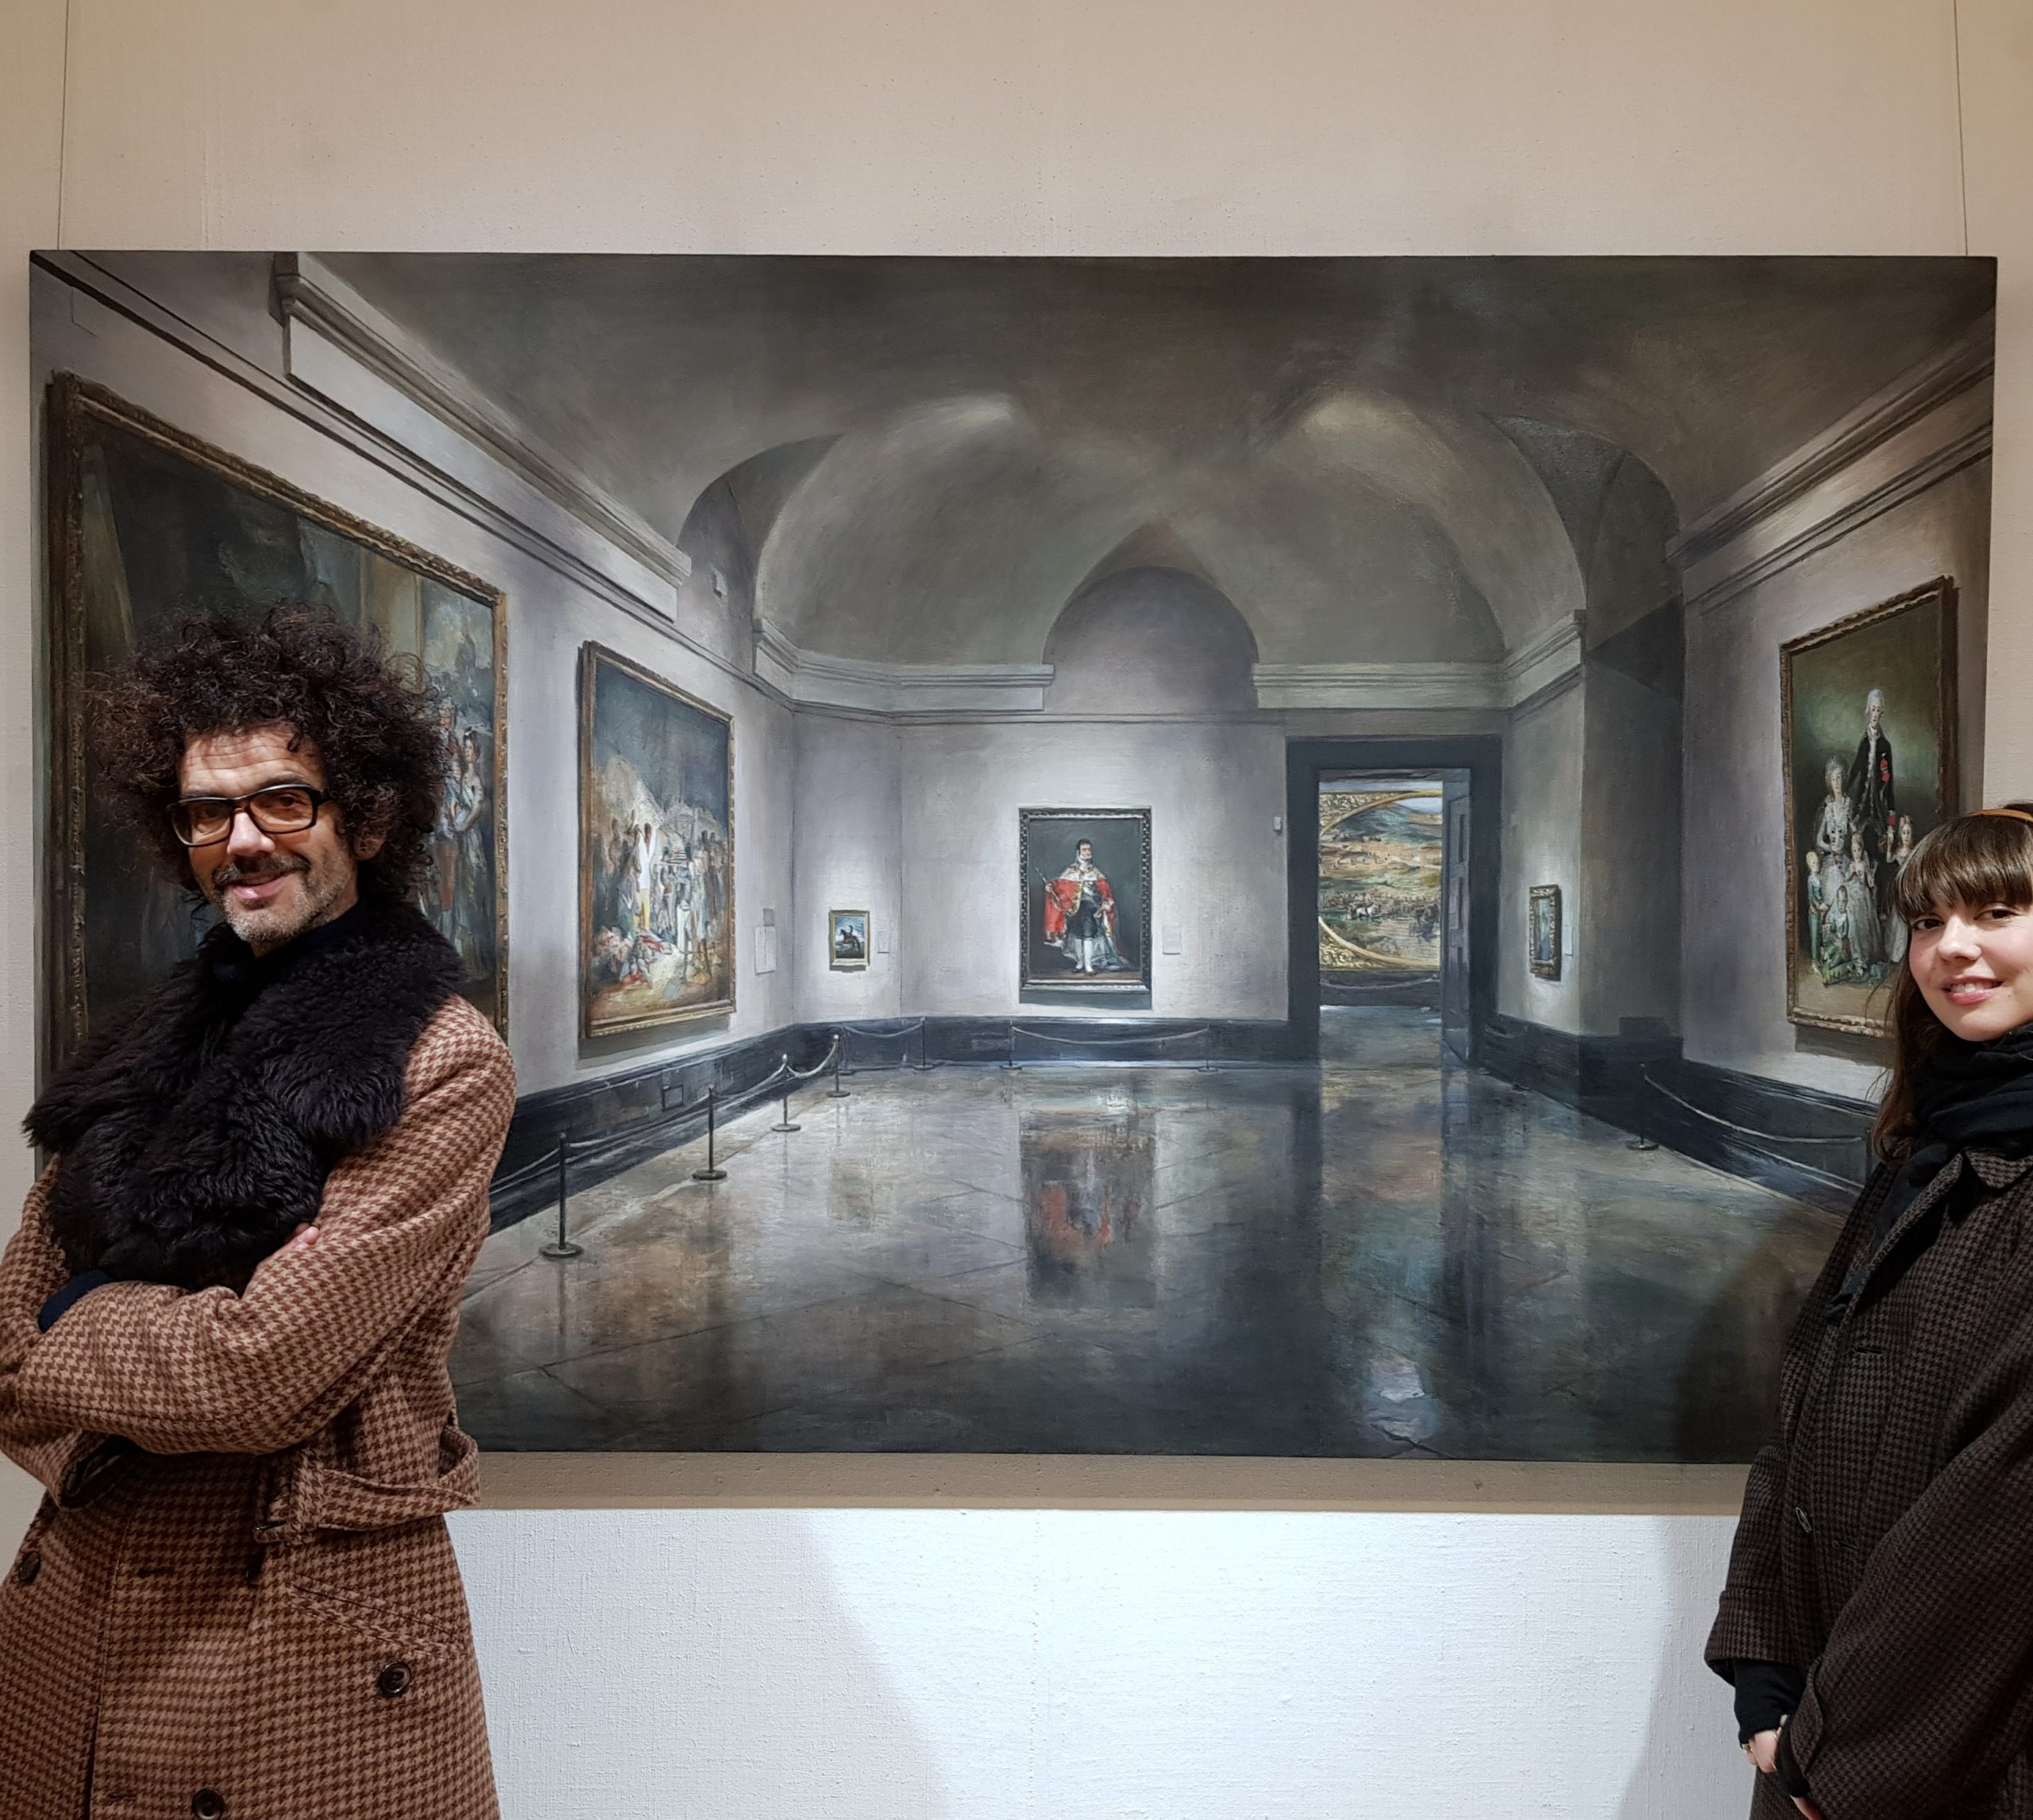 Frankie Poullain and Diane Birch view Goya in the Prado painting by Christian Furr at Richmond Atelier, Richmond upon Thames 2020